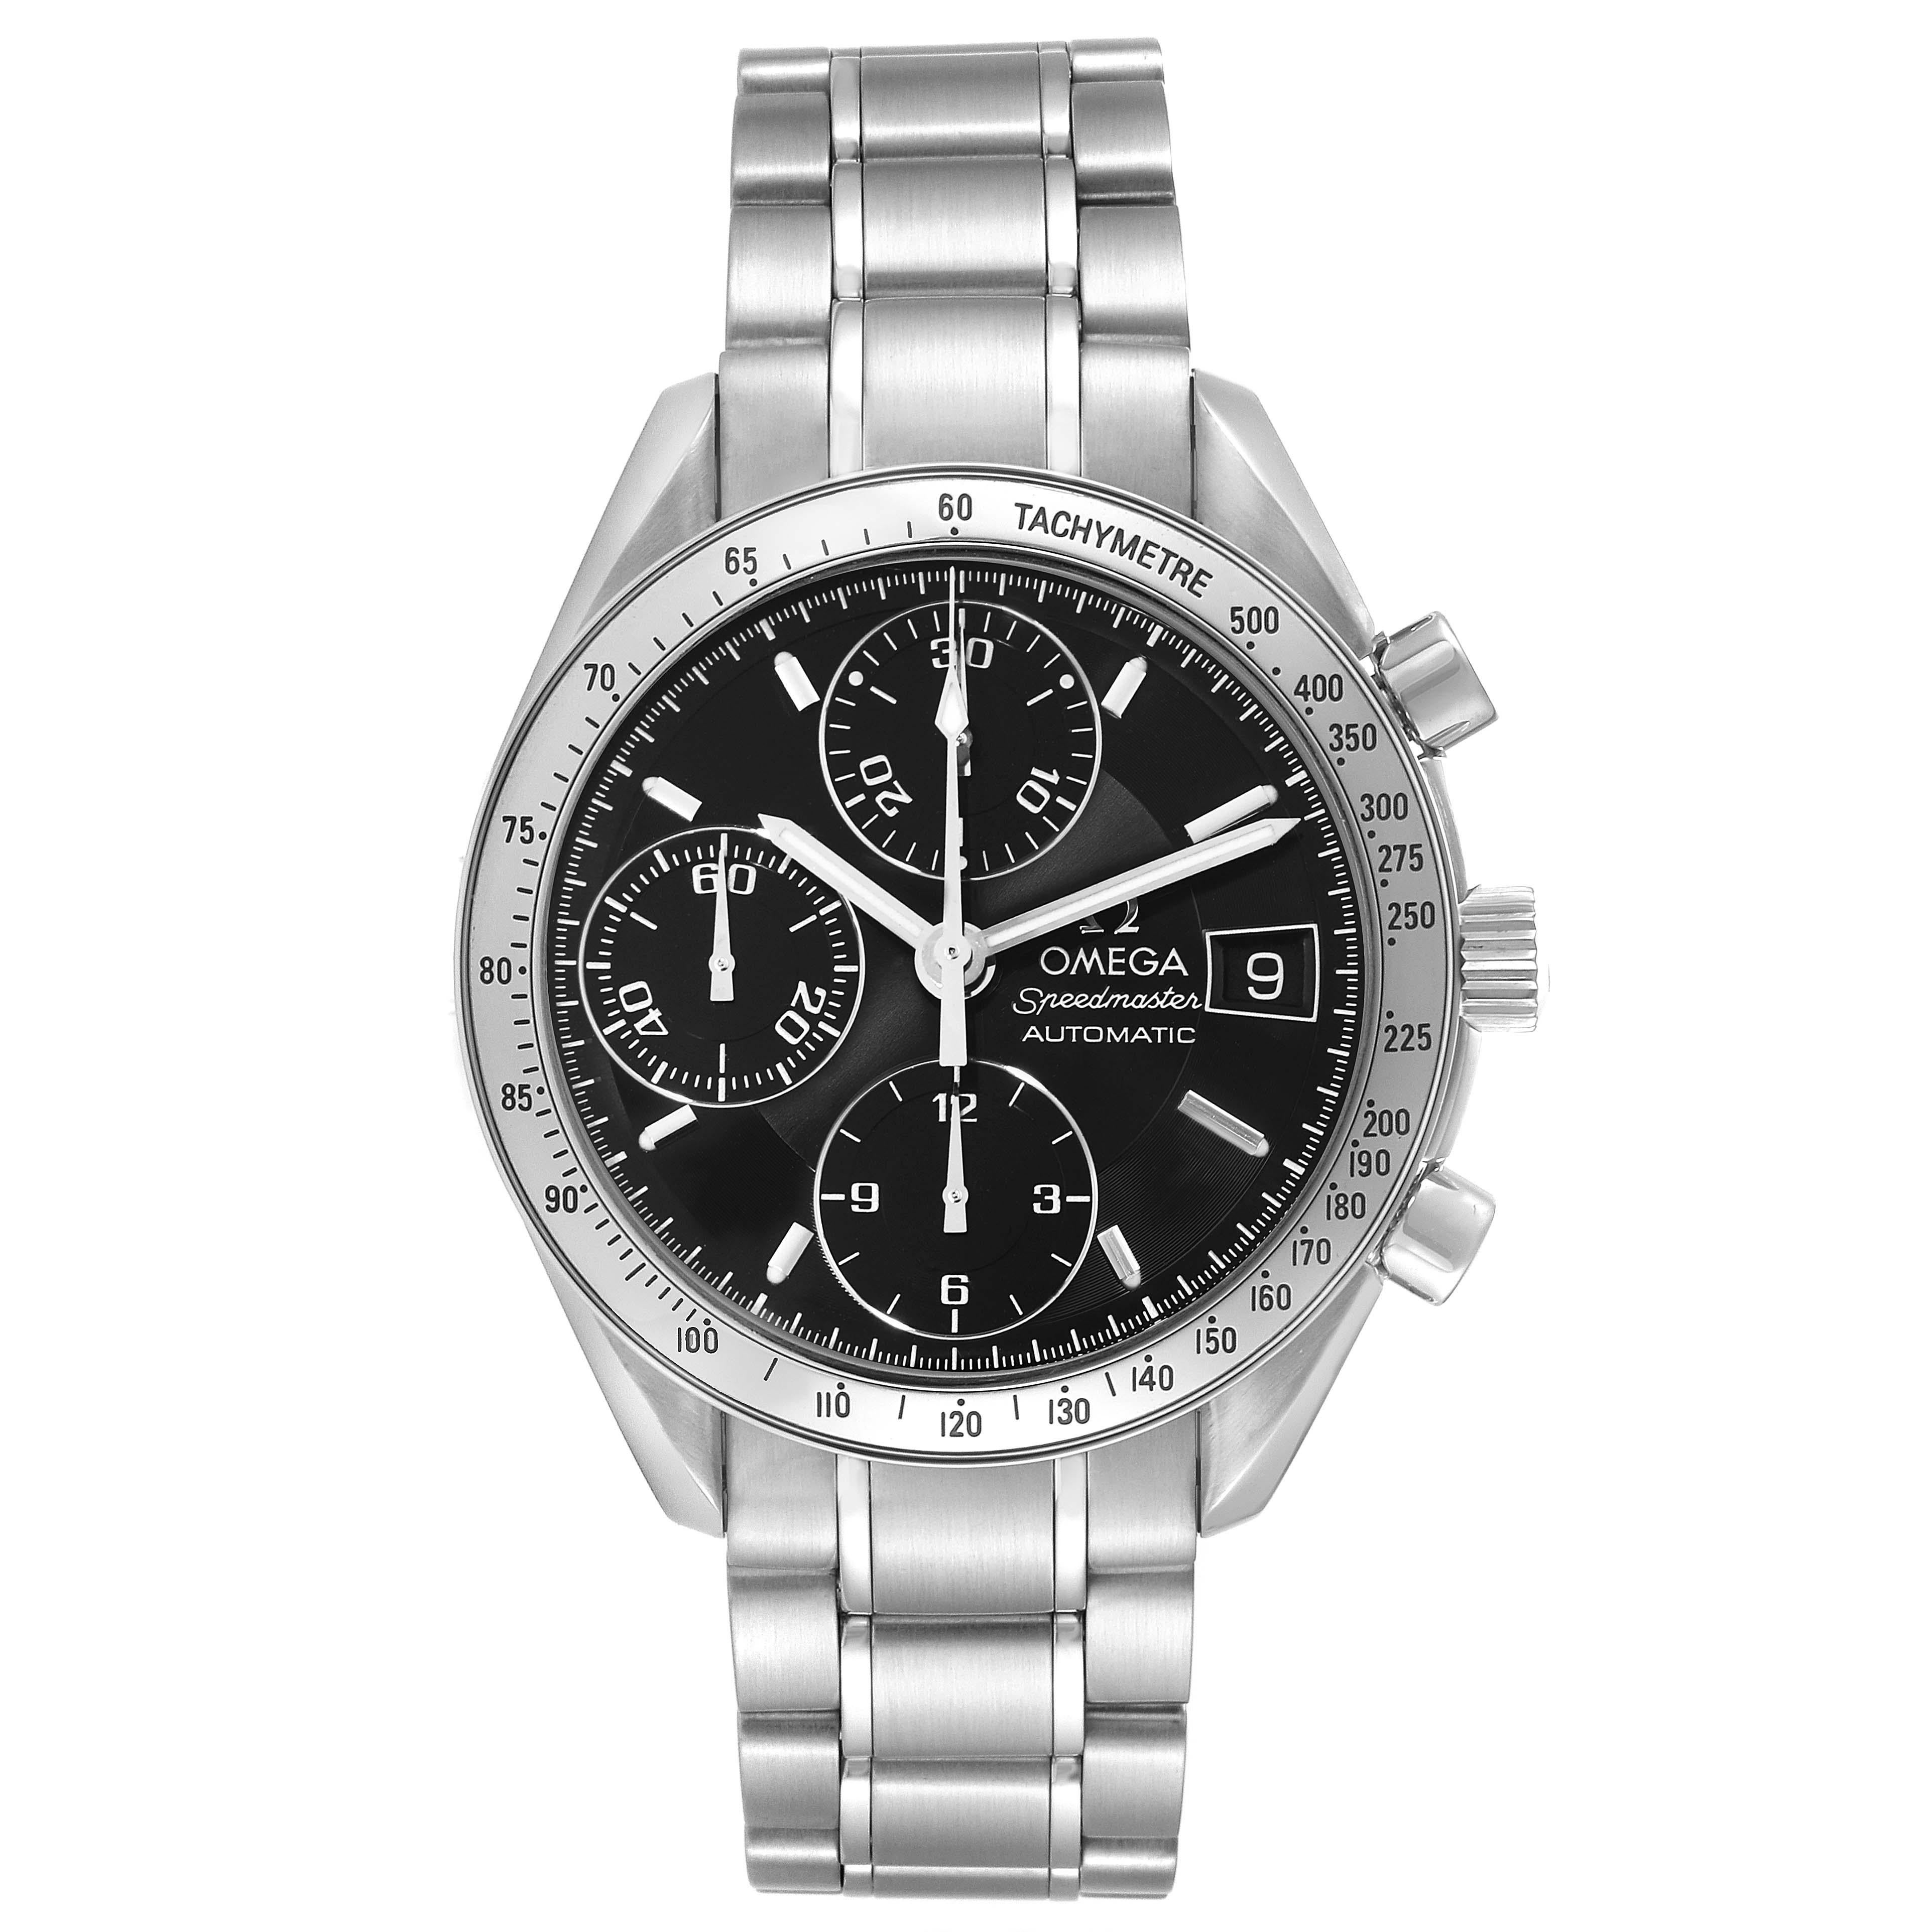 Omega Speedmaster Date 39mm Automatic Steel Mens Watch 3513.50.00 Box Card. Automatic self-winding chronograph movement. Stainless steel round case 39 mm in diameter. Stainless steel bezel with tachymetre function. Scratch-resistant sapphire crystal